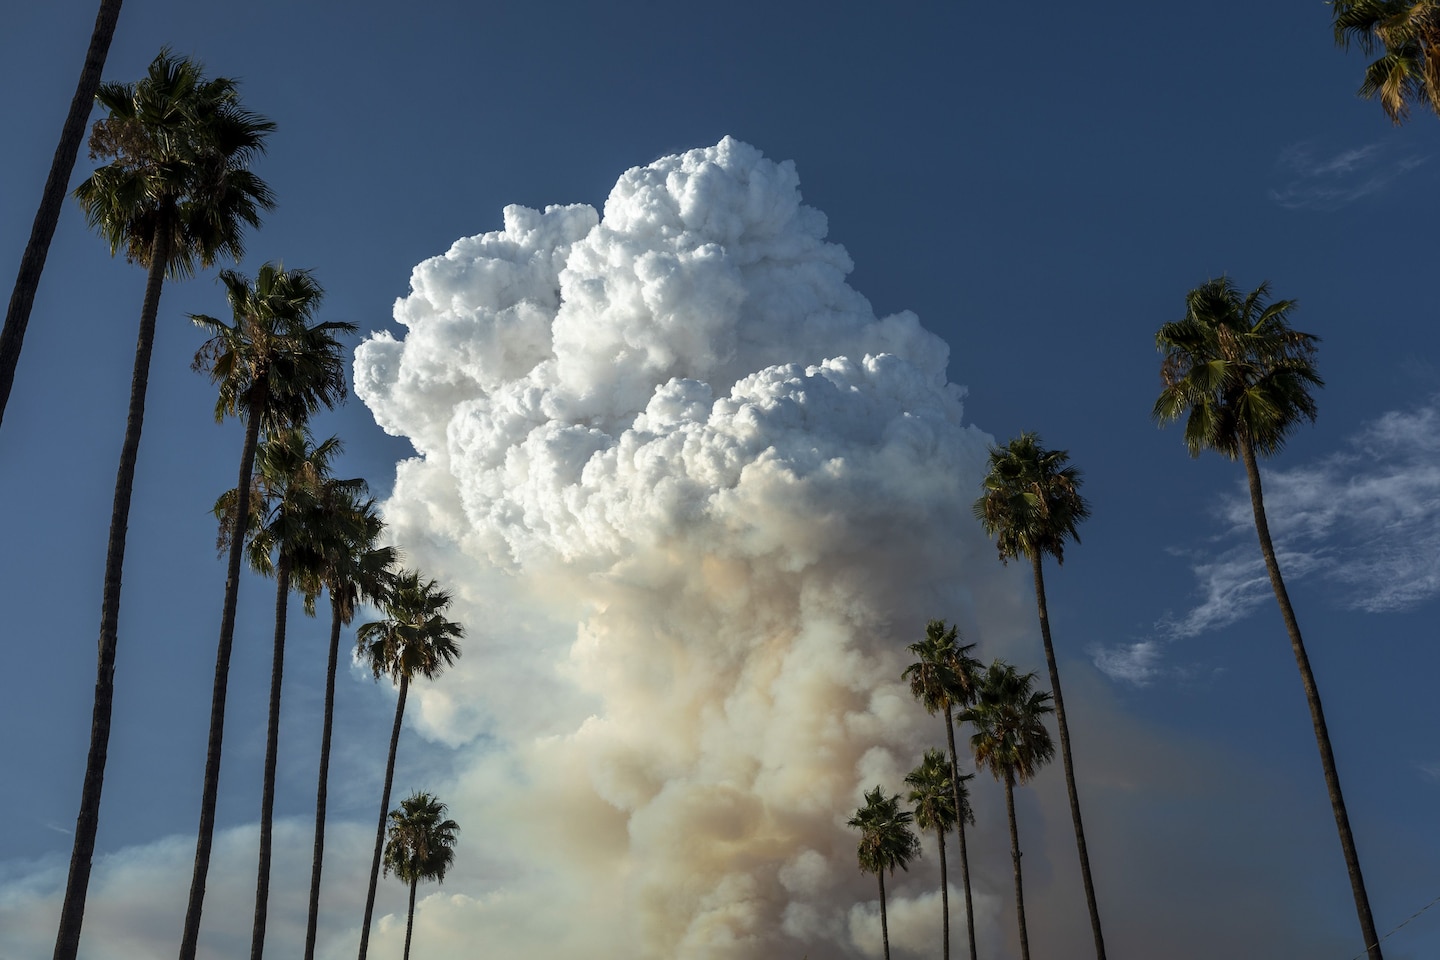 Record-crushing heat, fire tornadoes and freak thunderstorms: The weather is wild in the West